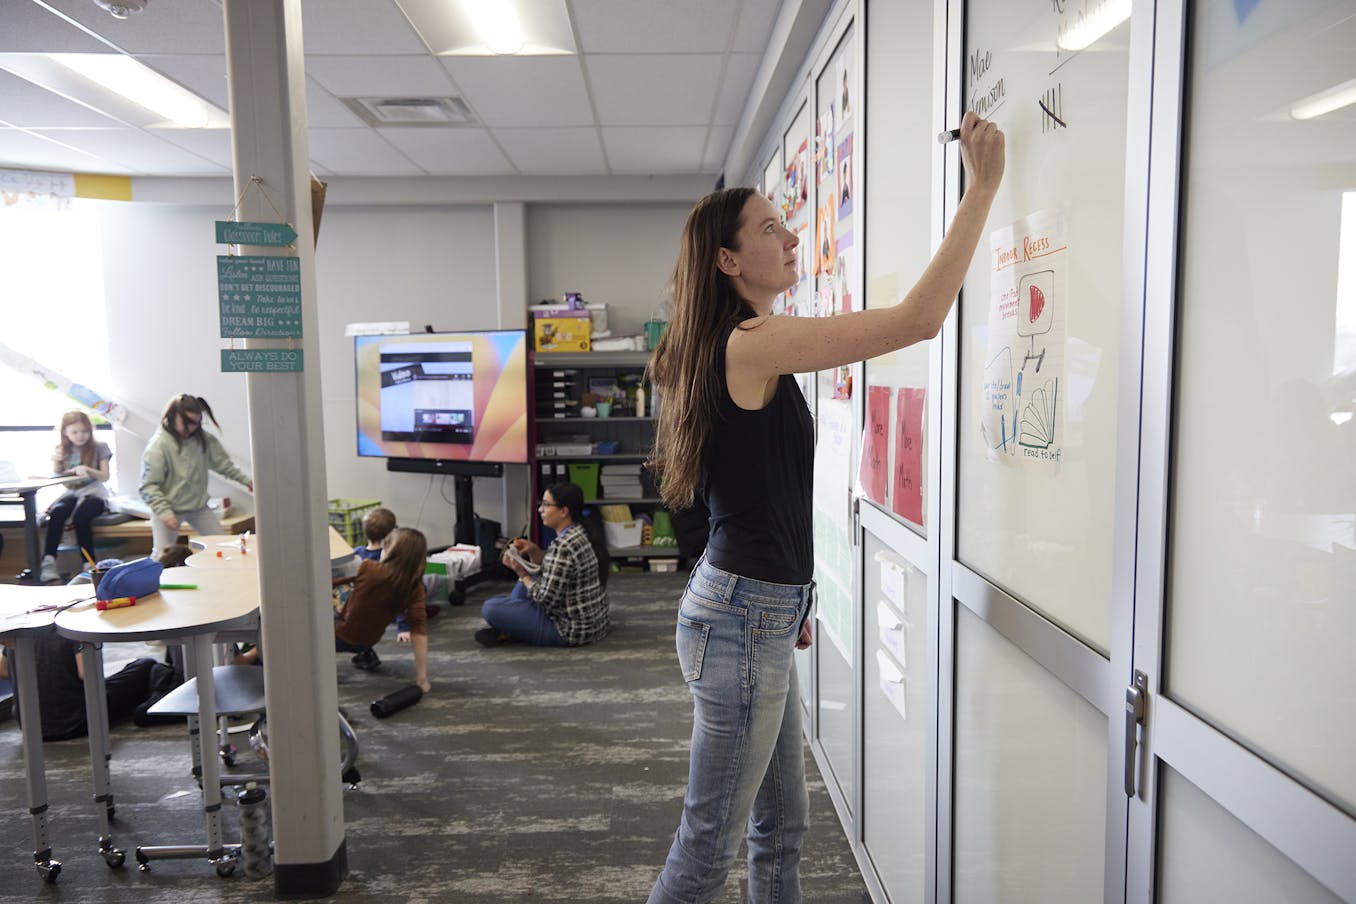 Teacher in a classroom using the white glass walls as a whiteboard